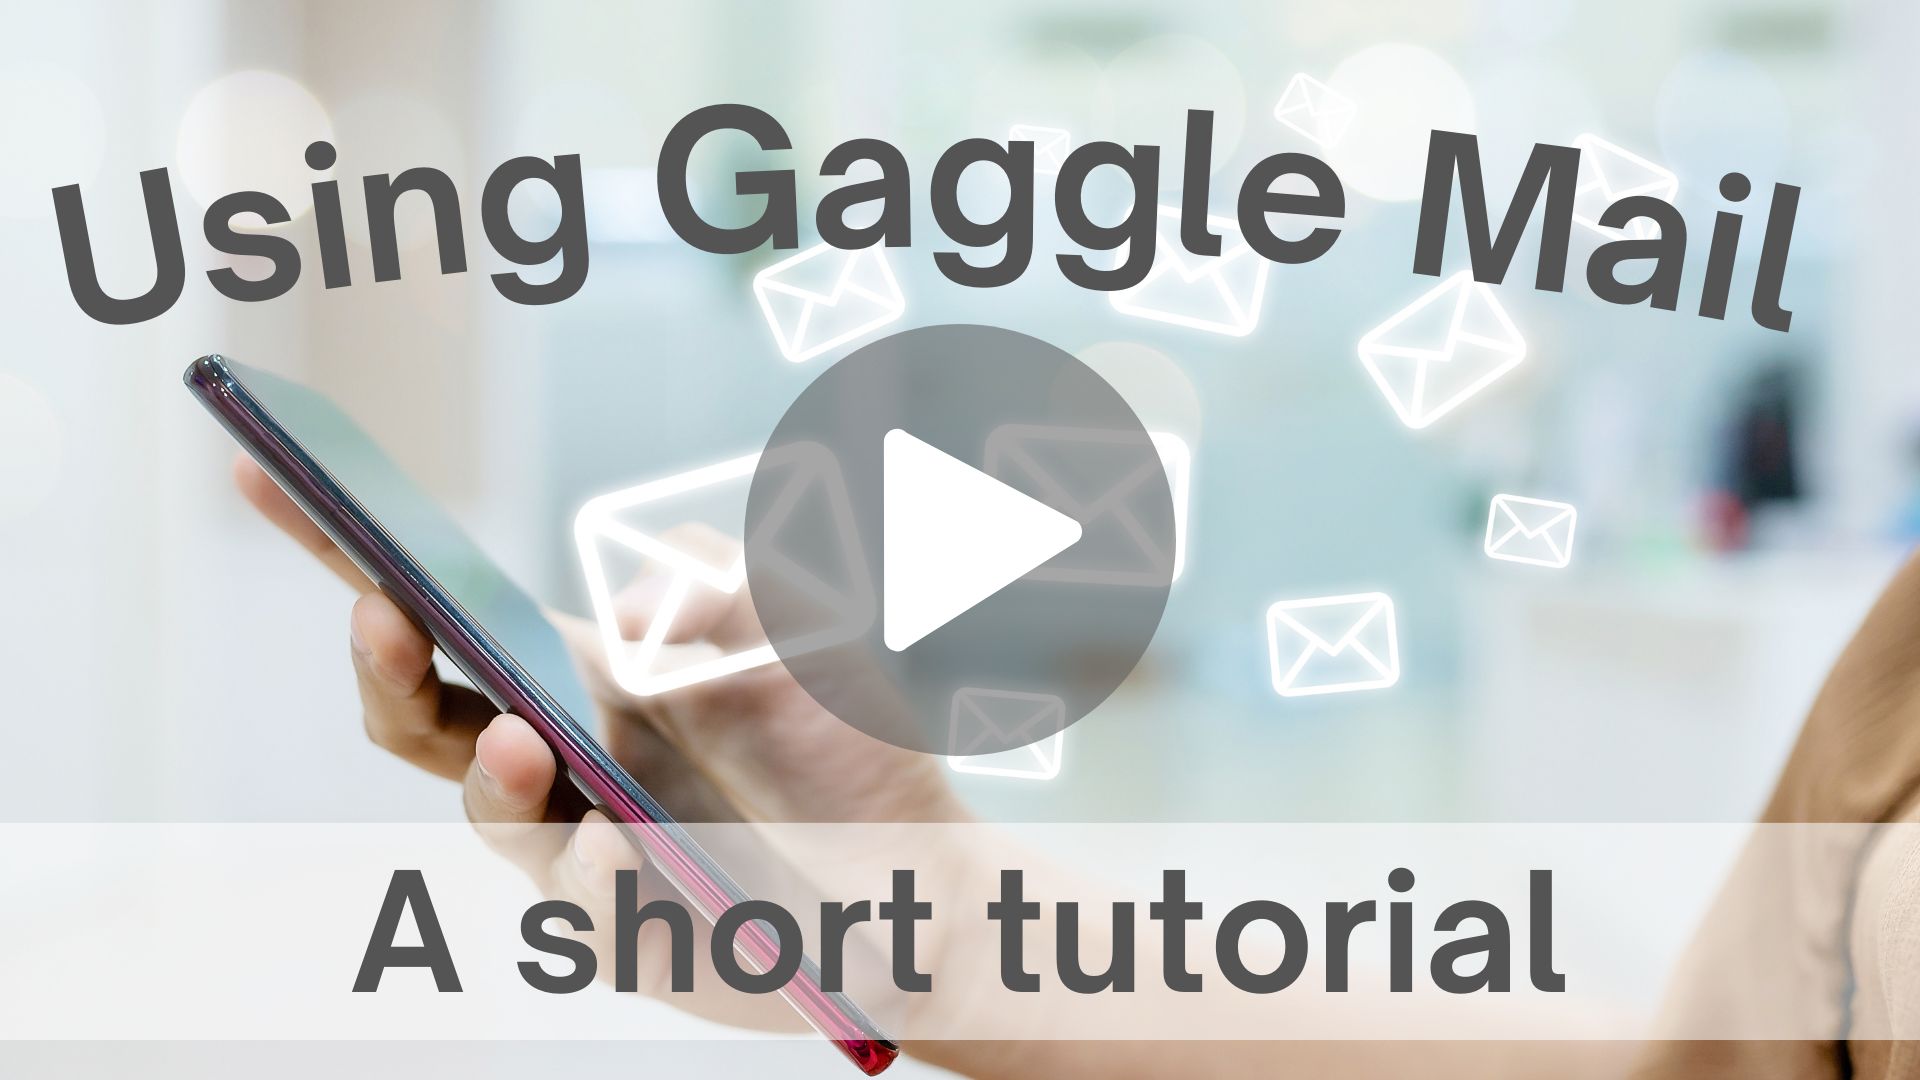 Lead slide for the Gaggle Email tutorial video.